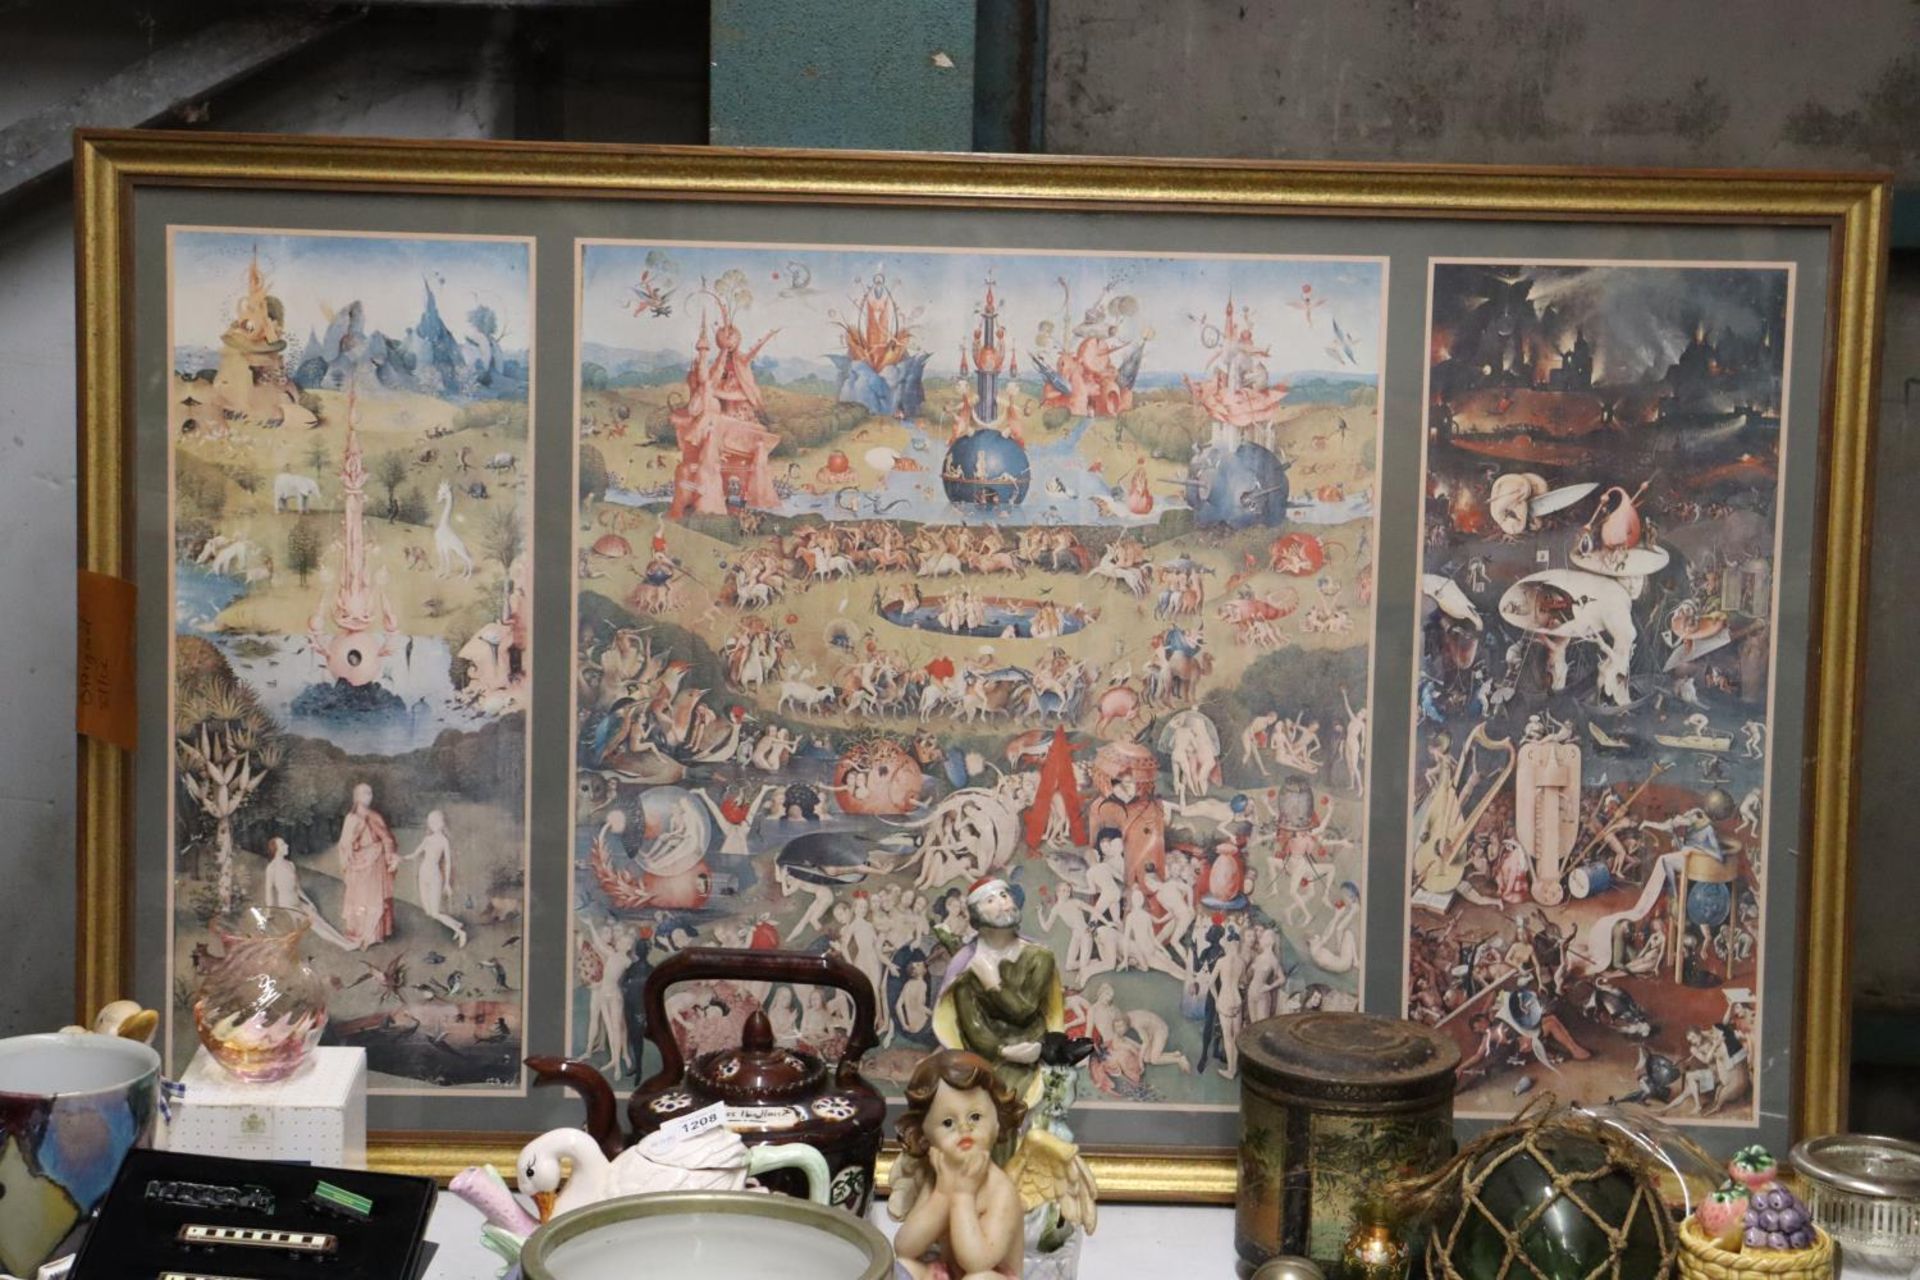 A FRAMED PRINT OF "HIRONIMUS BOSCH GARDEN OF EARTHLY DELIGHTS"